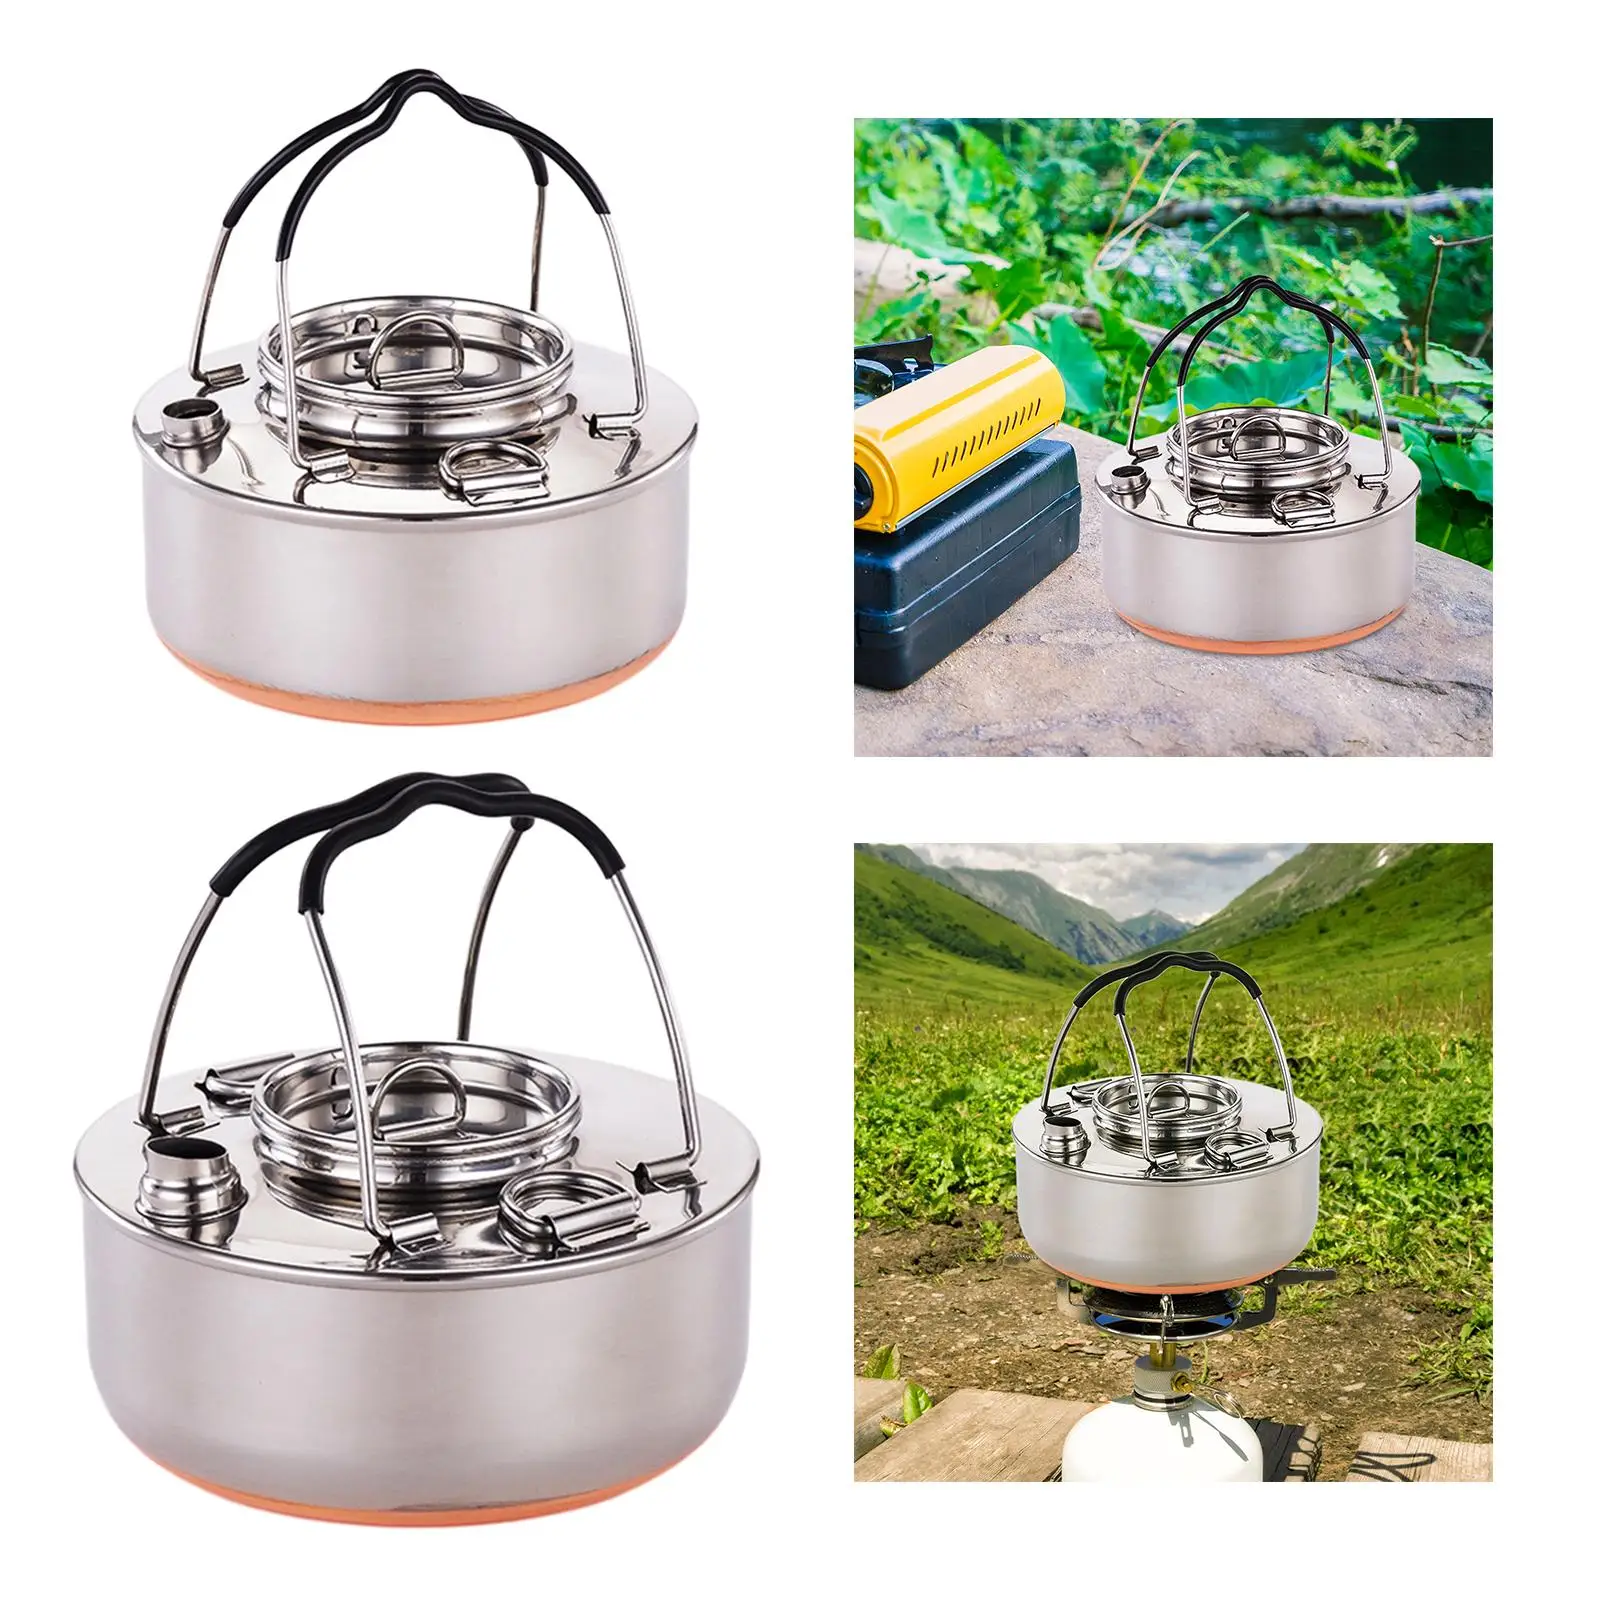 Camping Kettle Camping Tea Kettle Anti Scald Handle Portable Teapot Water Kettle